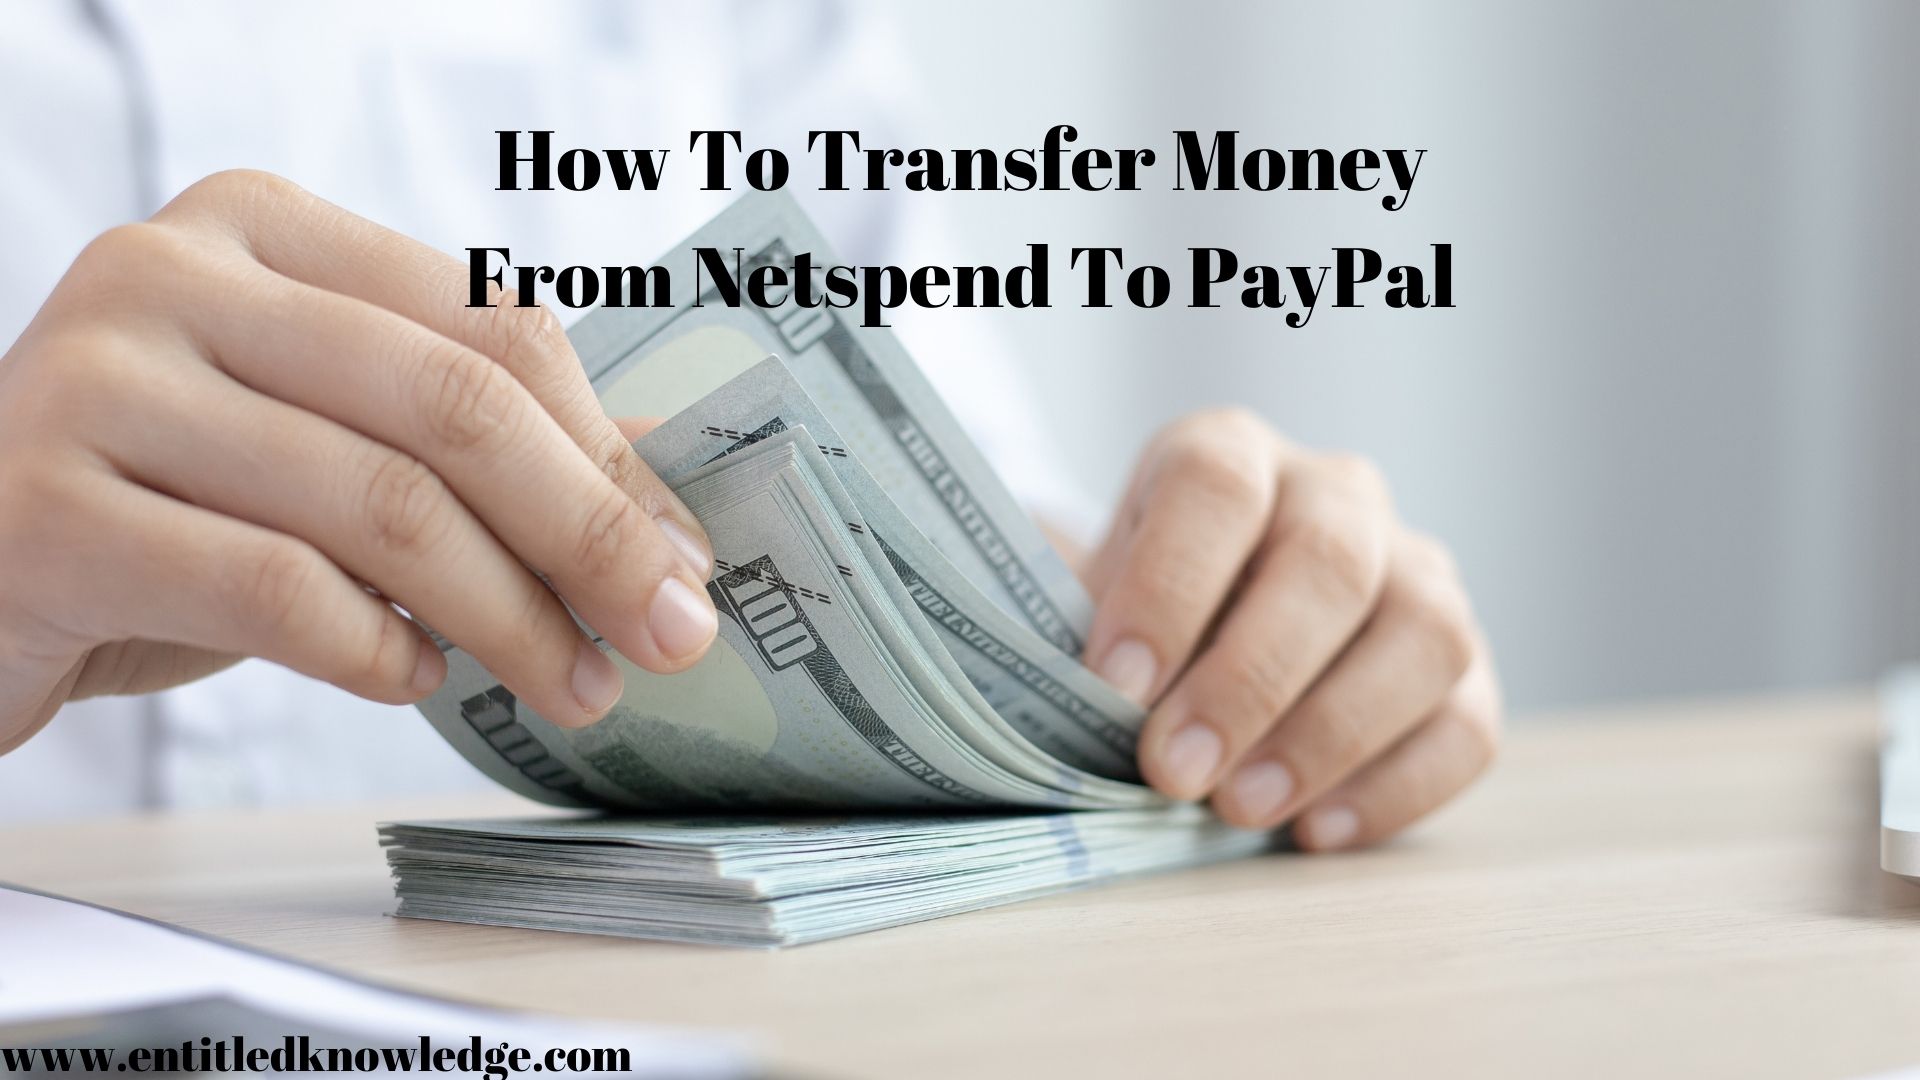 How To Transfer Money From Netspend To PayPal